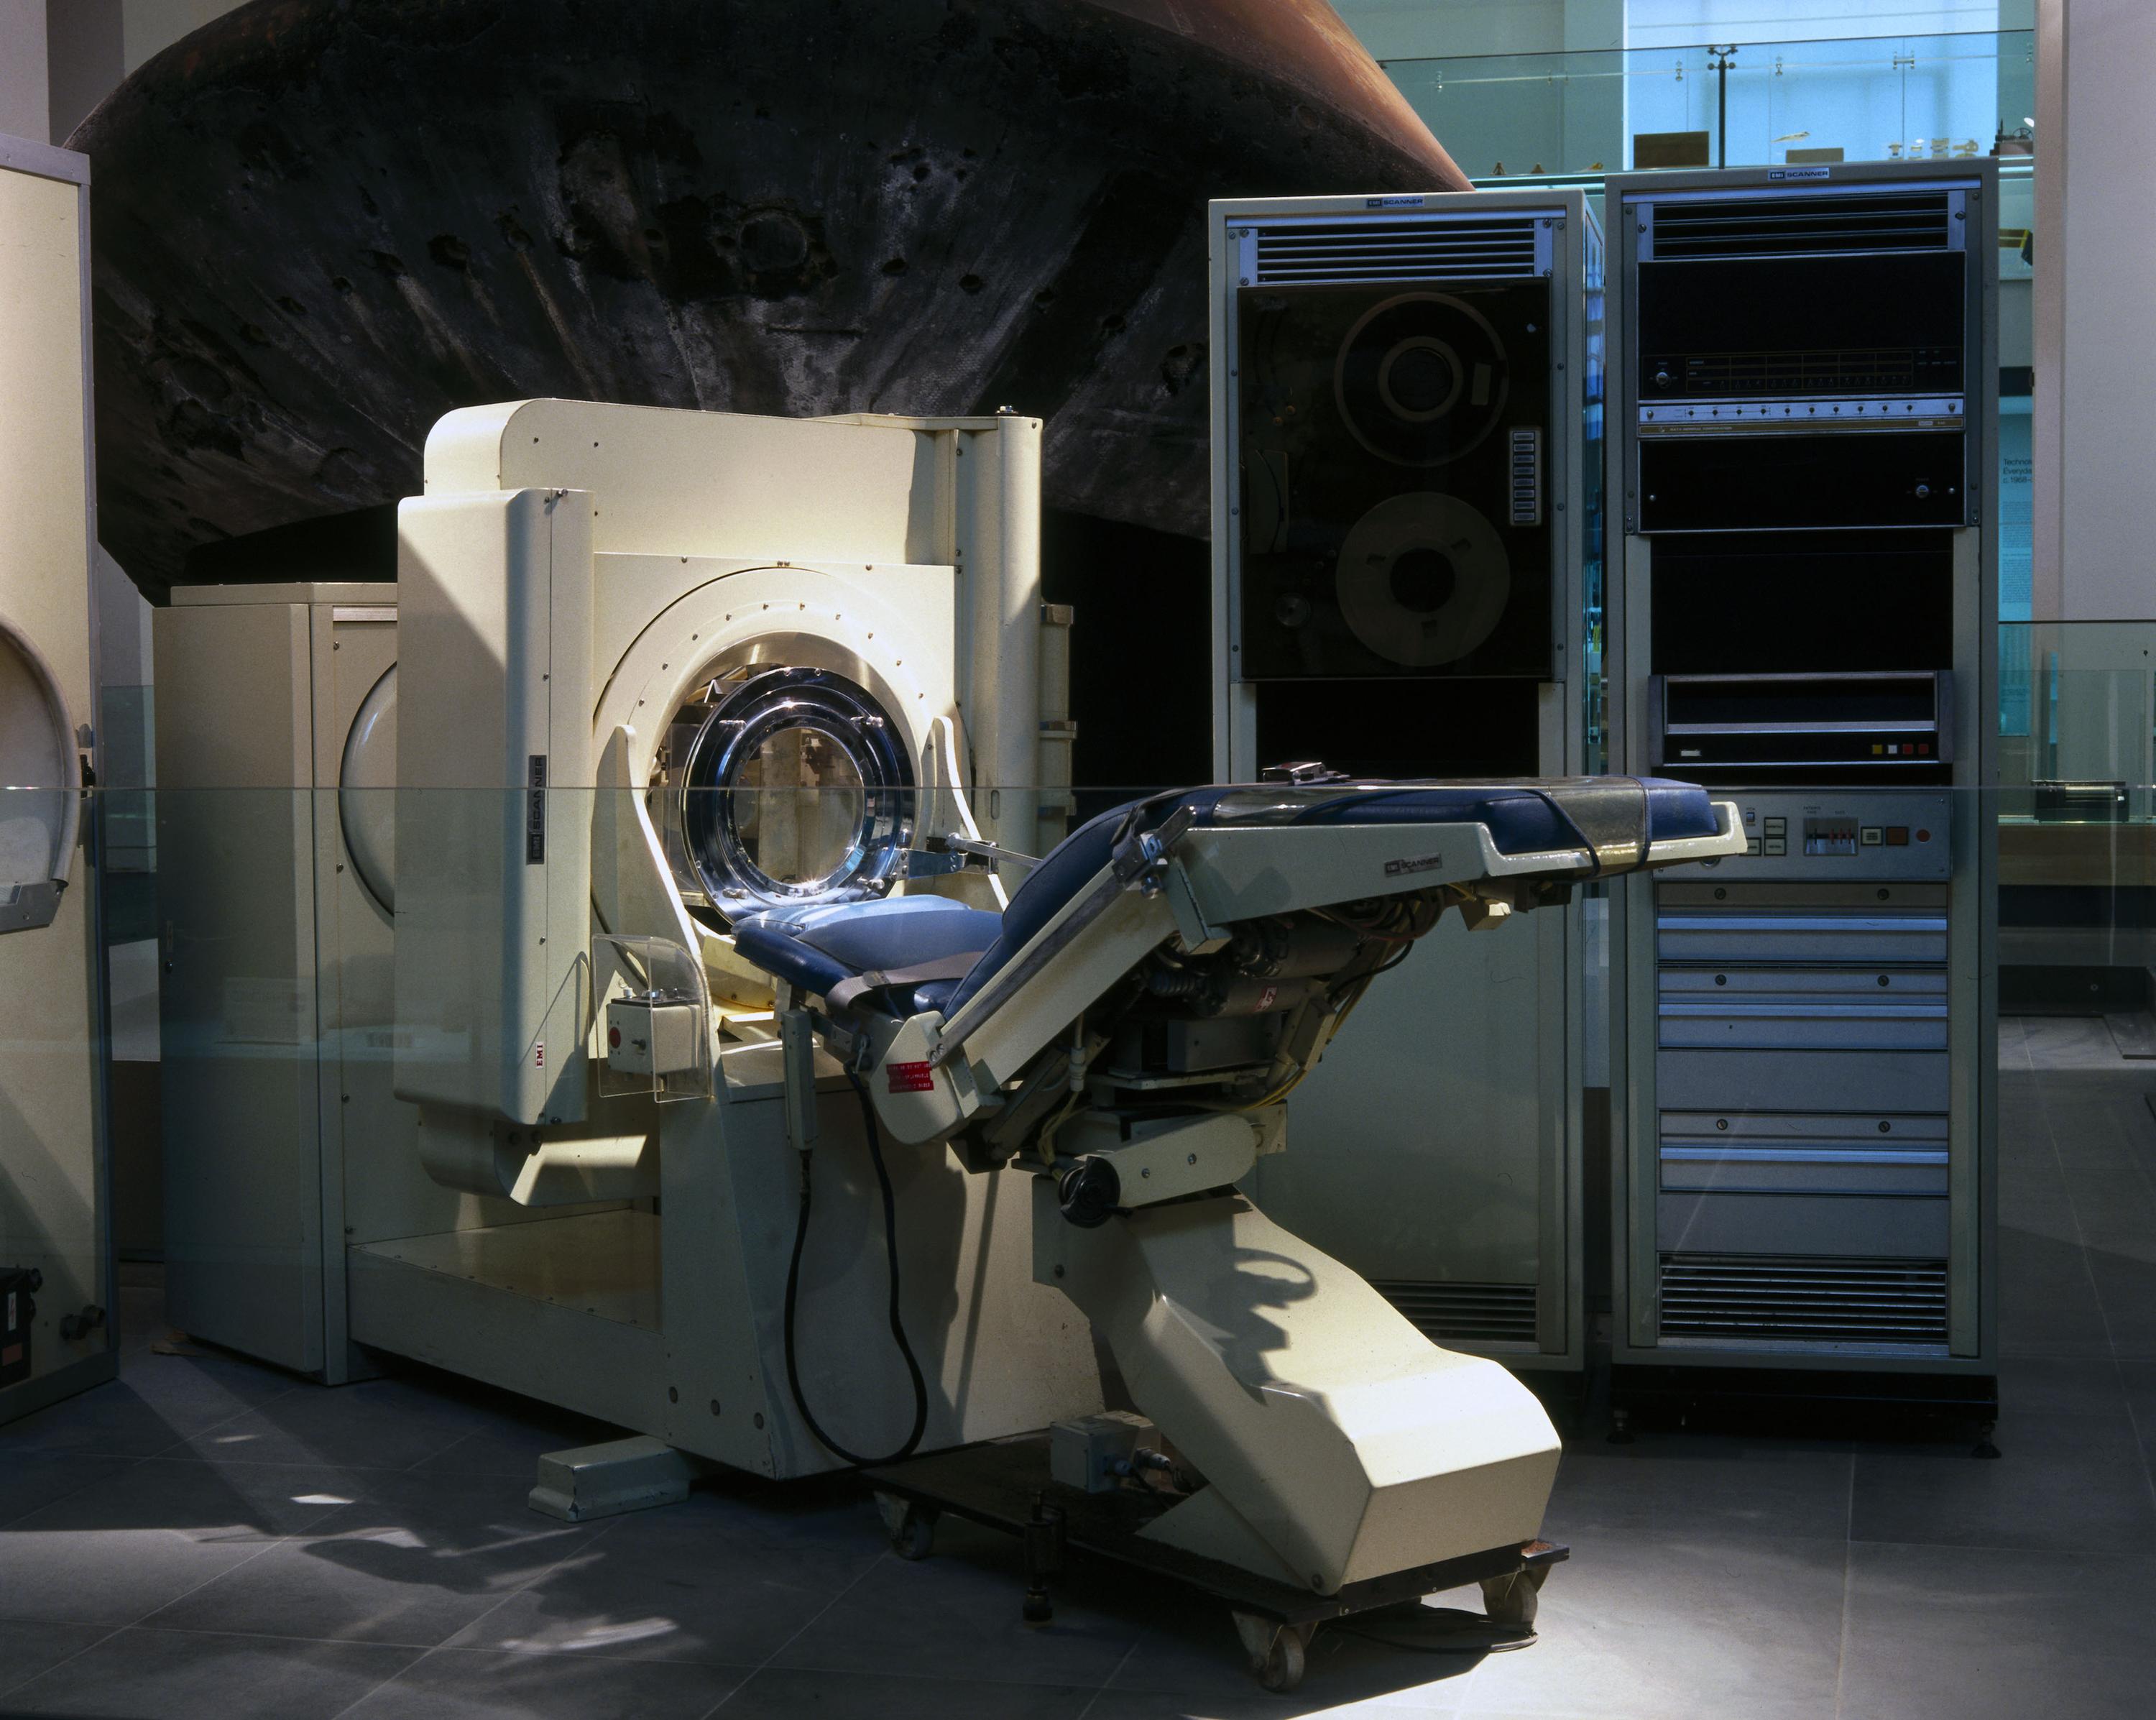 EMI CT brain scanner, installed at Atkinson Morley's Hospital, Wimbledon in 1971